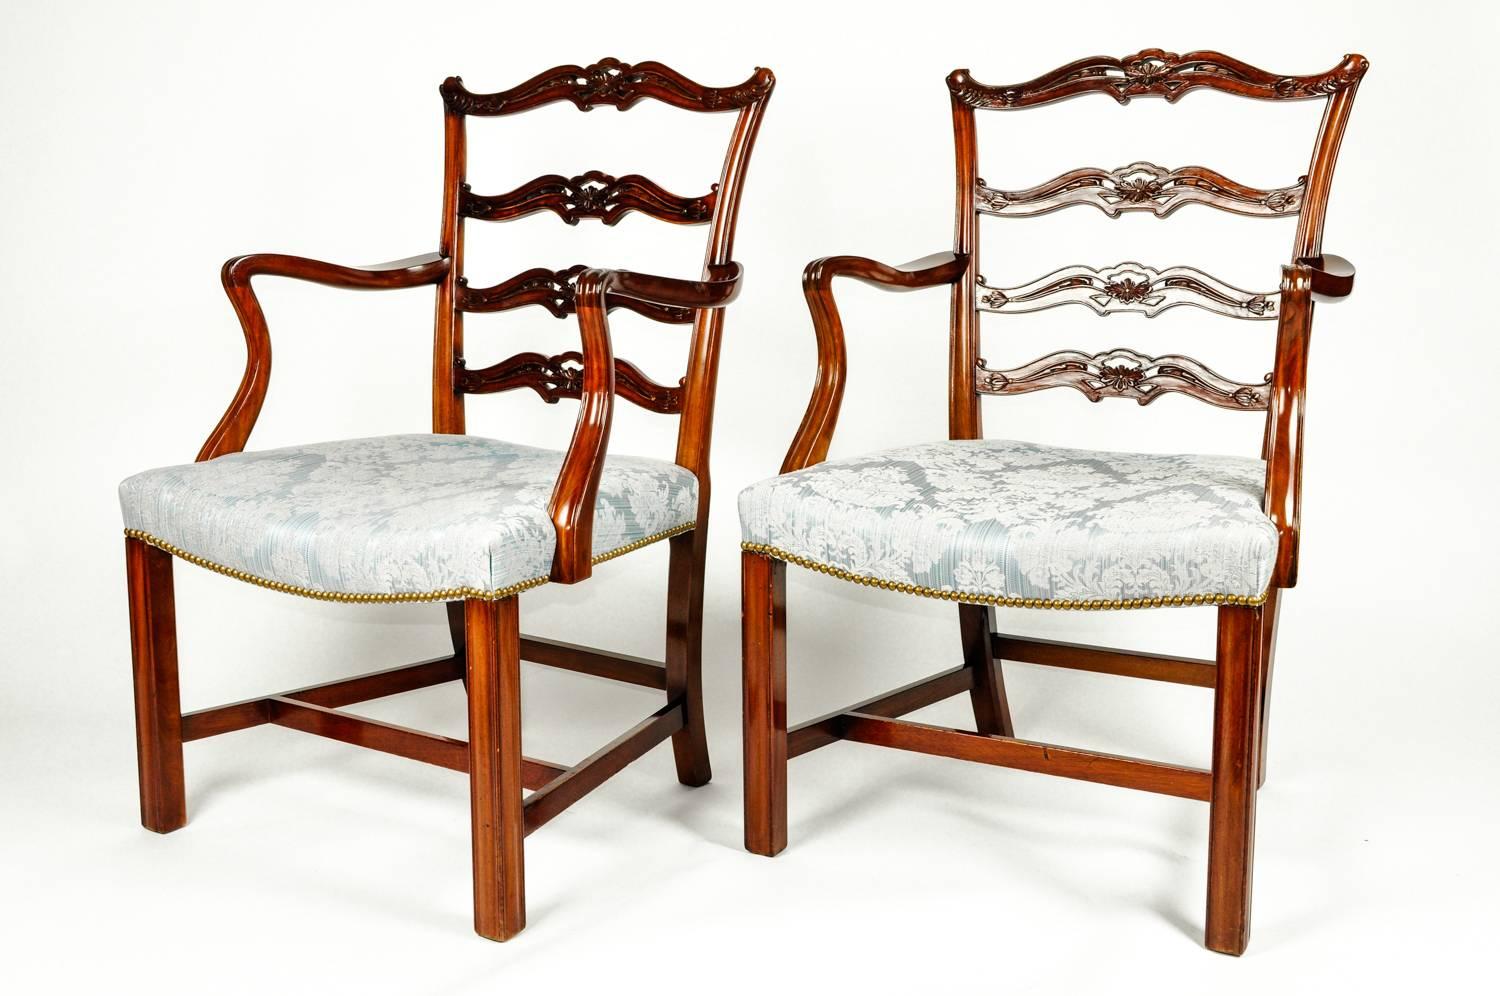 Antique pair of English carved ribbon back chairs with gray damask upholstery. Each chair measure 39 inches high x 24 inches width seat High 16 inches. Chairs are in excellent condition. Recently reupholstered.